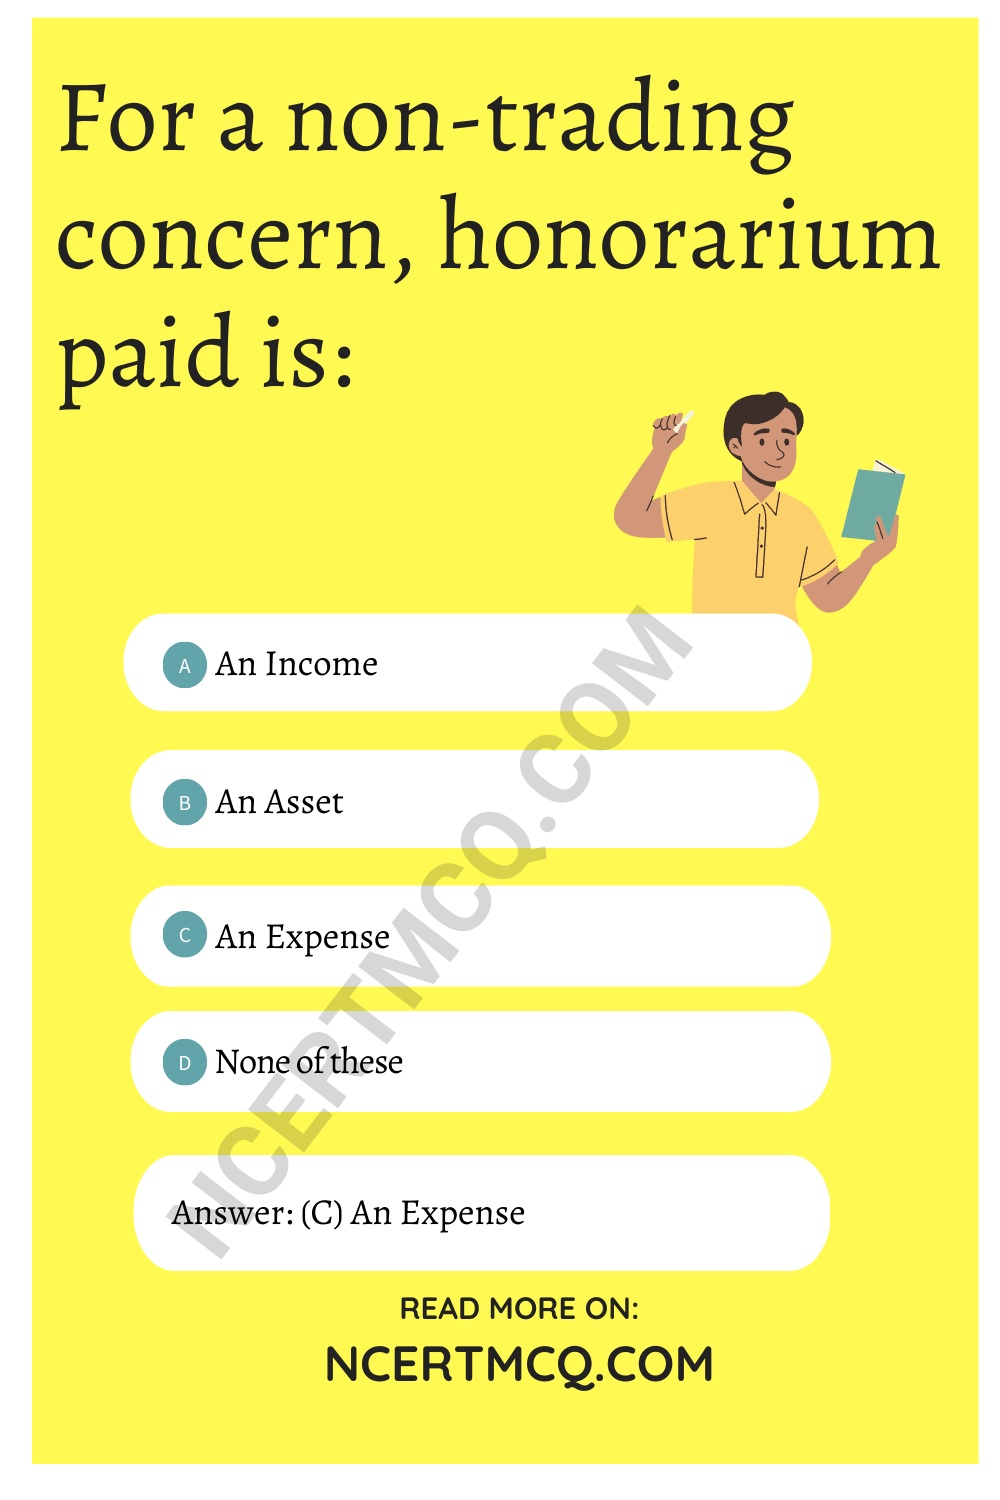 For a non-trading concern, honorarium paid is: